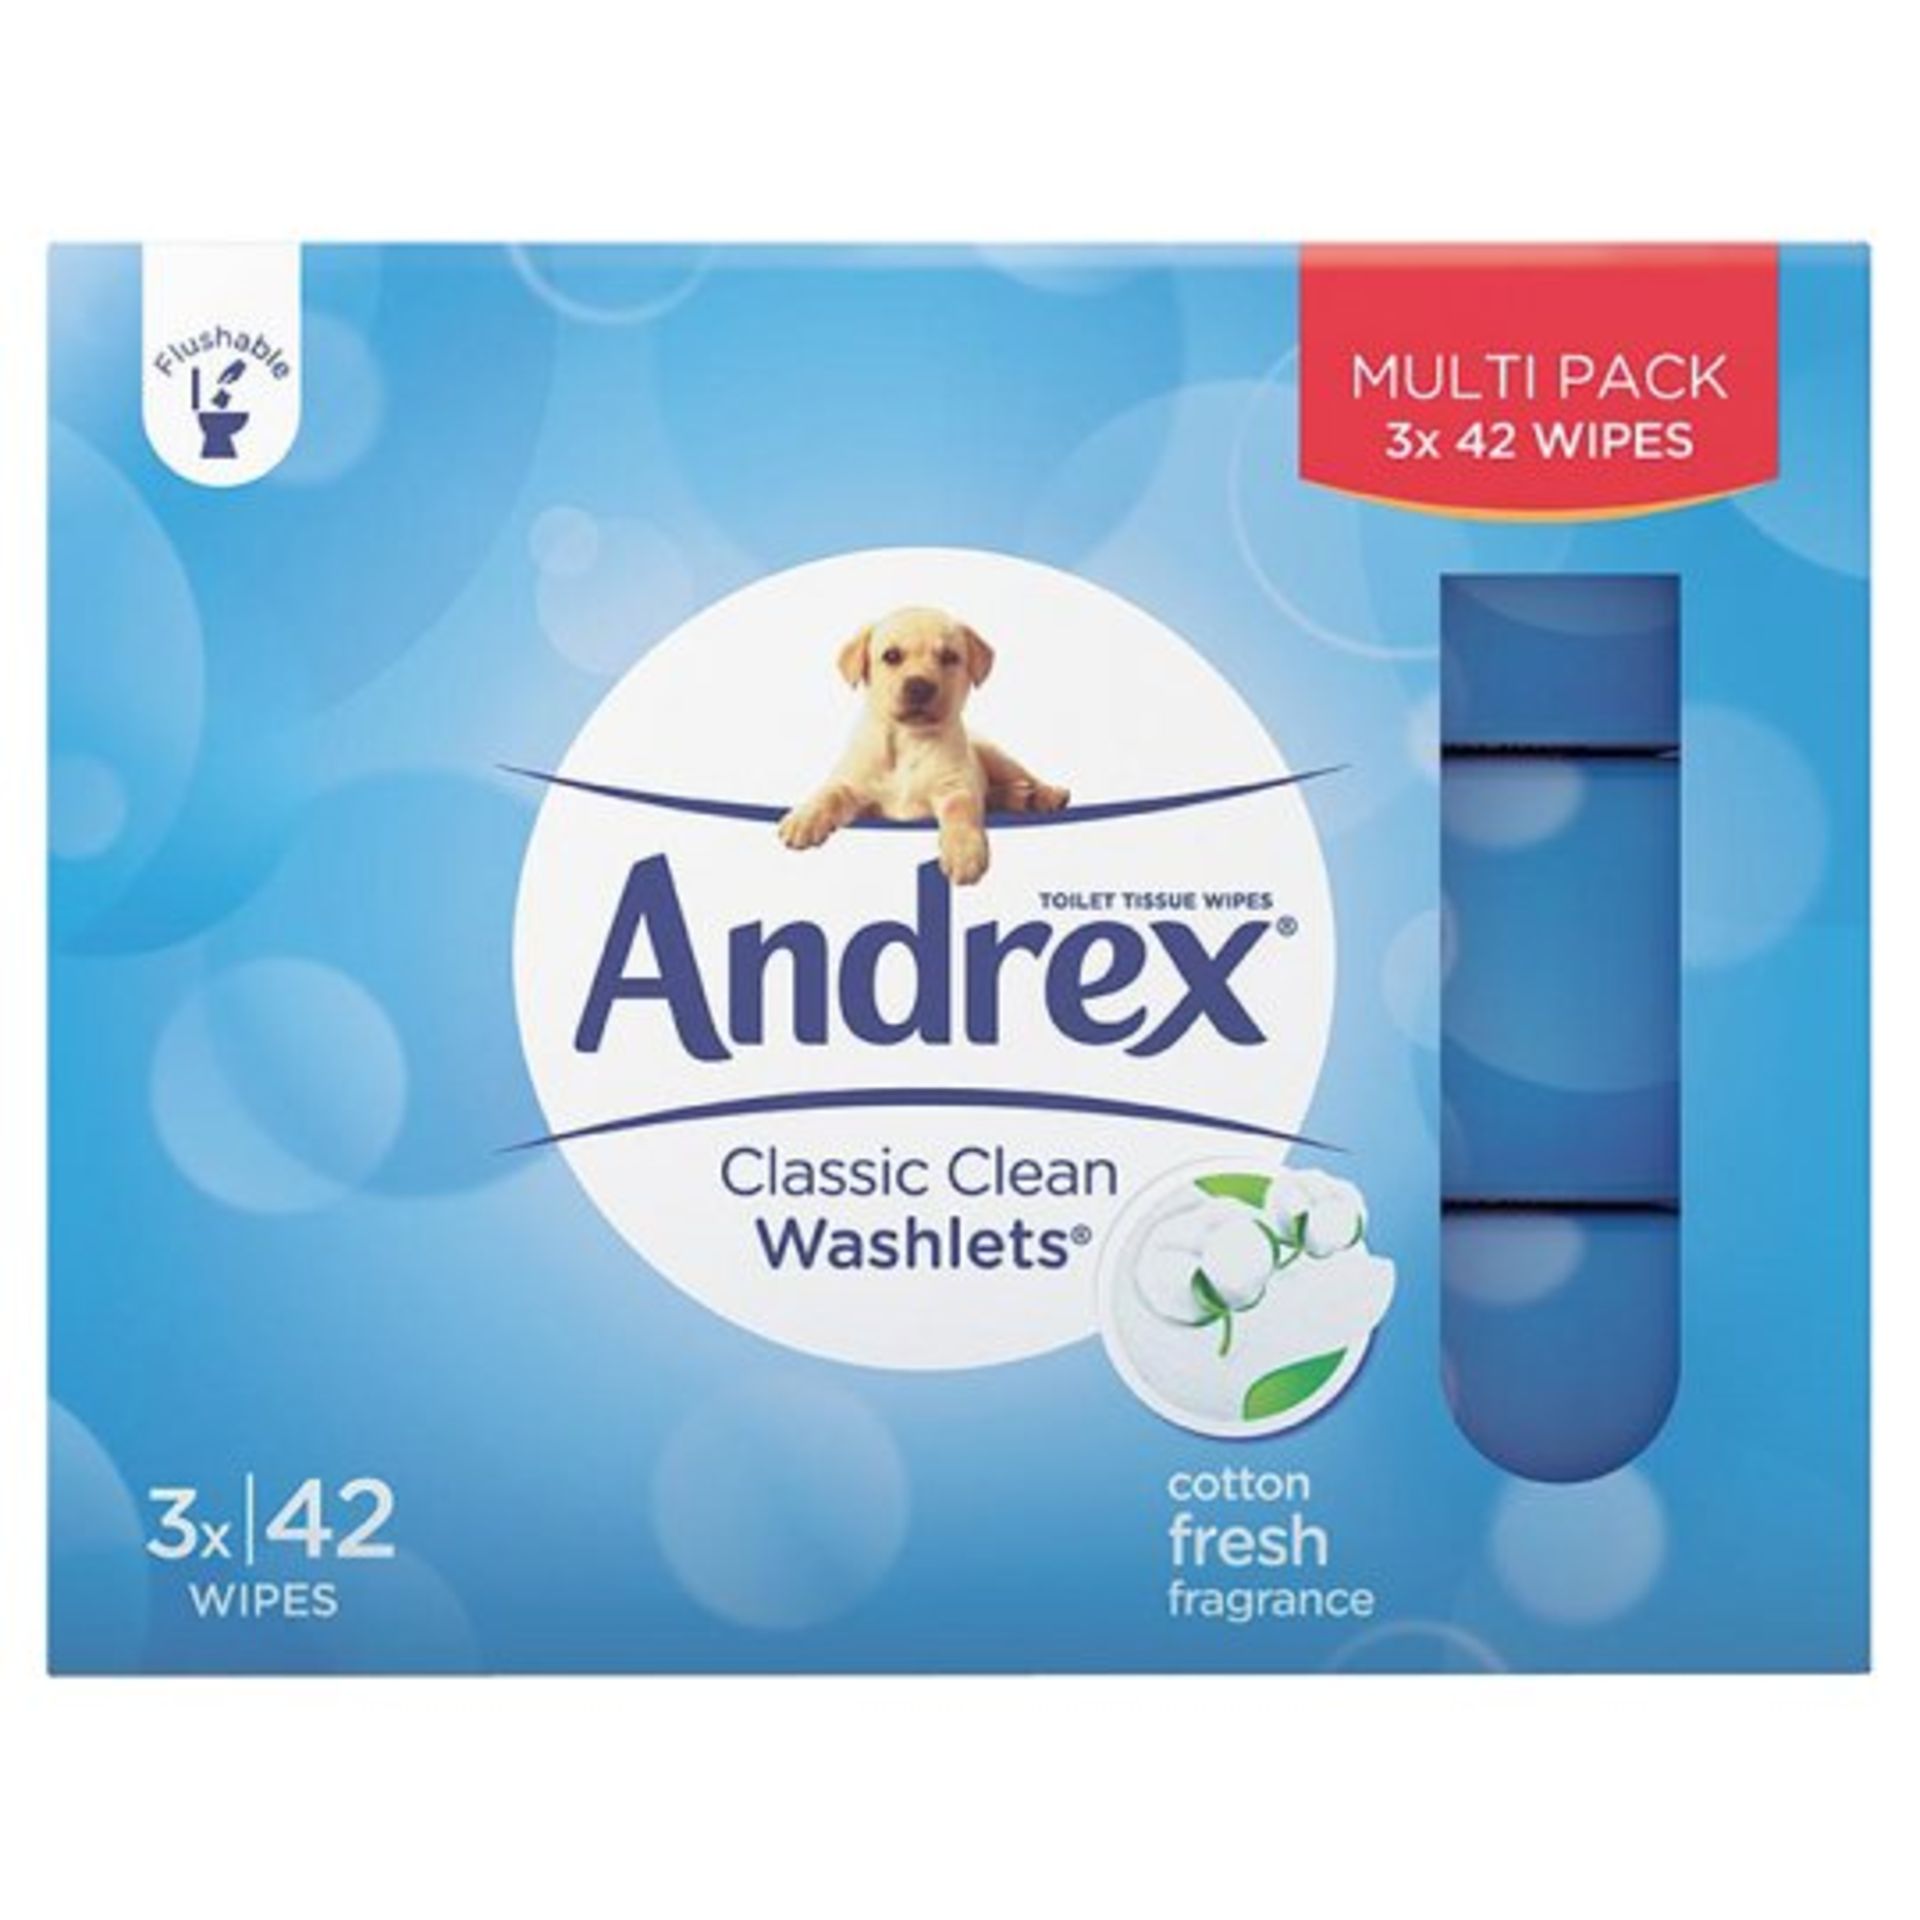 V Brand New Andrex Classic Clean Washlets 3 Pack X 2 YOUR BID PRICE TO BE MULTIPLIED BY TWO